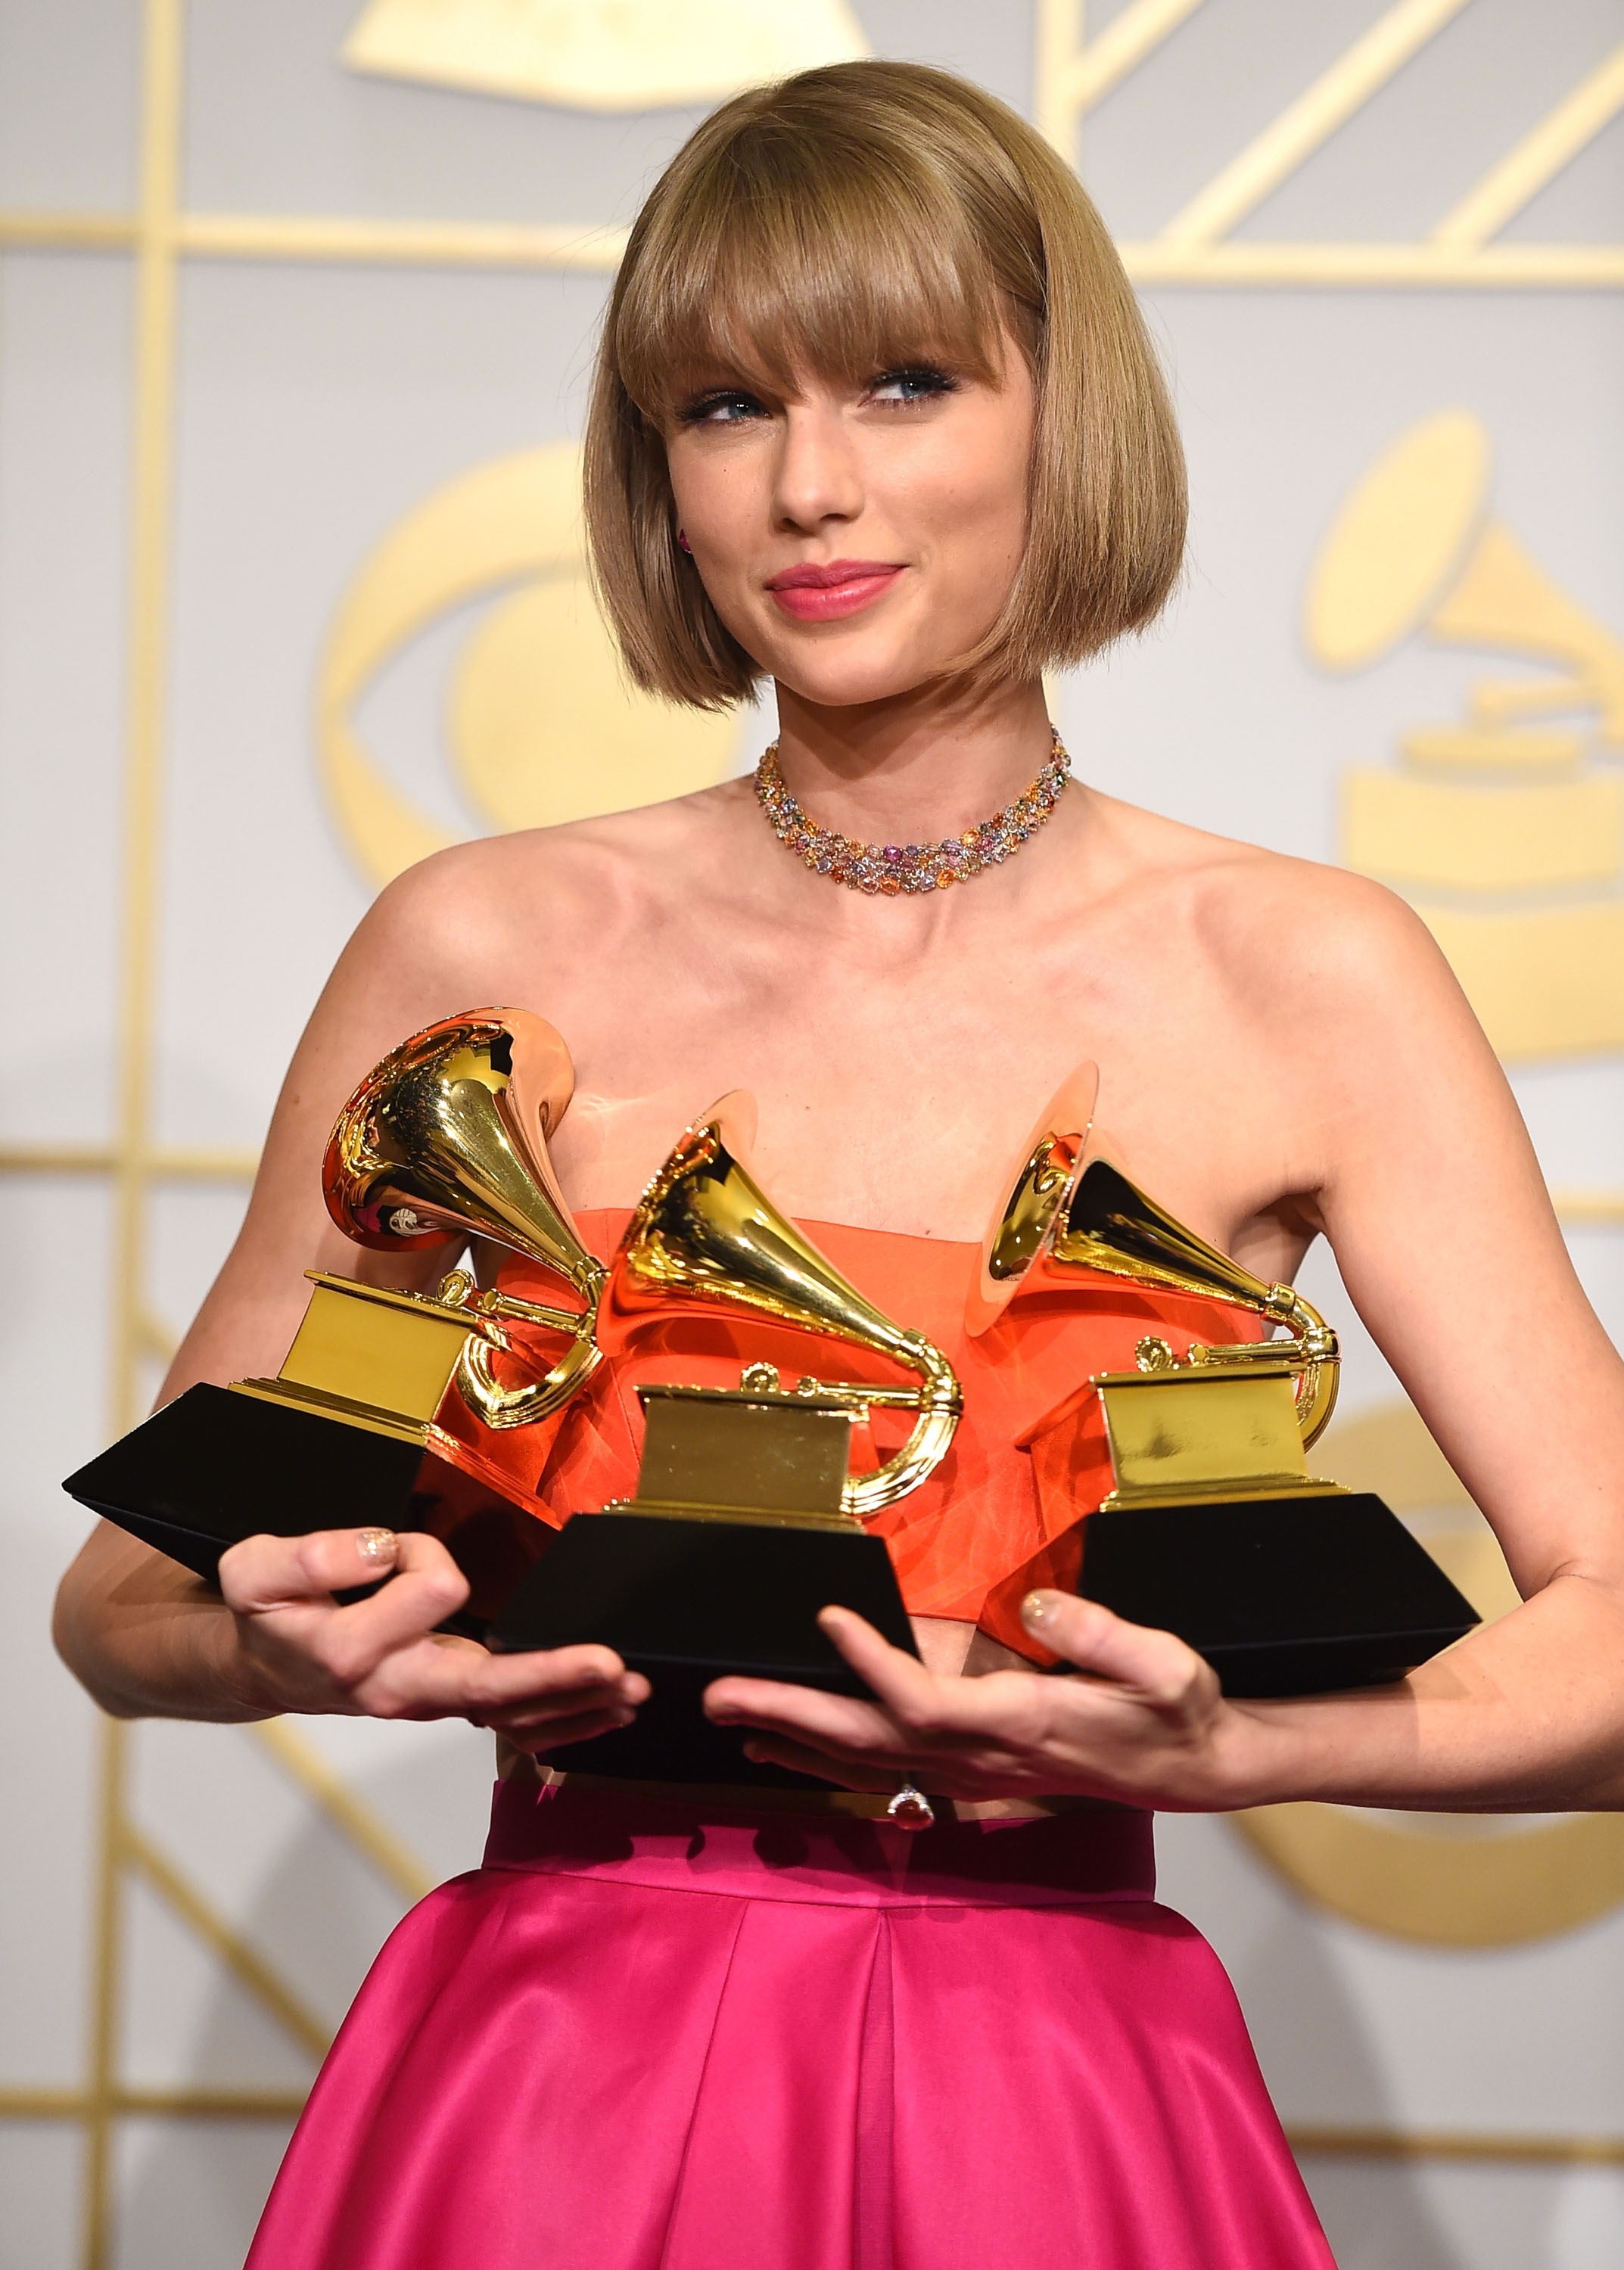 Getty Images/GRAMMY®, GRAMMYs®, GRAMMY Awards®, and the gramophone logo are registered trademarks of The Recording Academy®  and are used under license ©2017 The Recording Academy